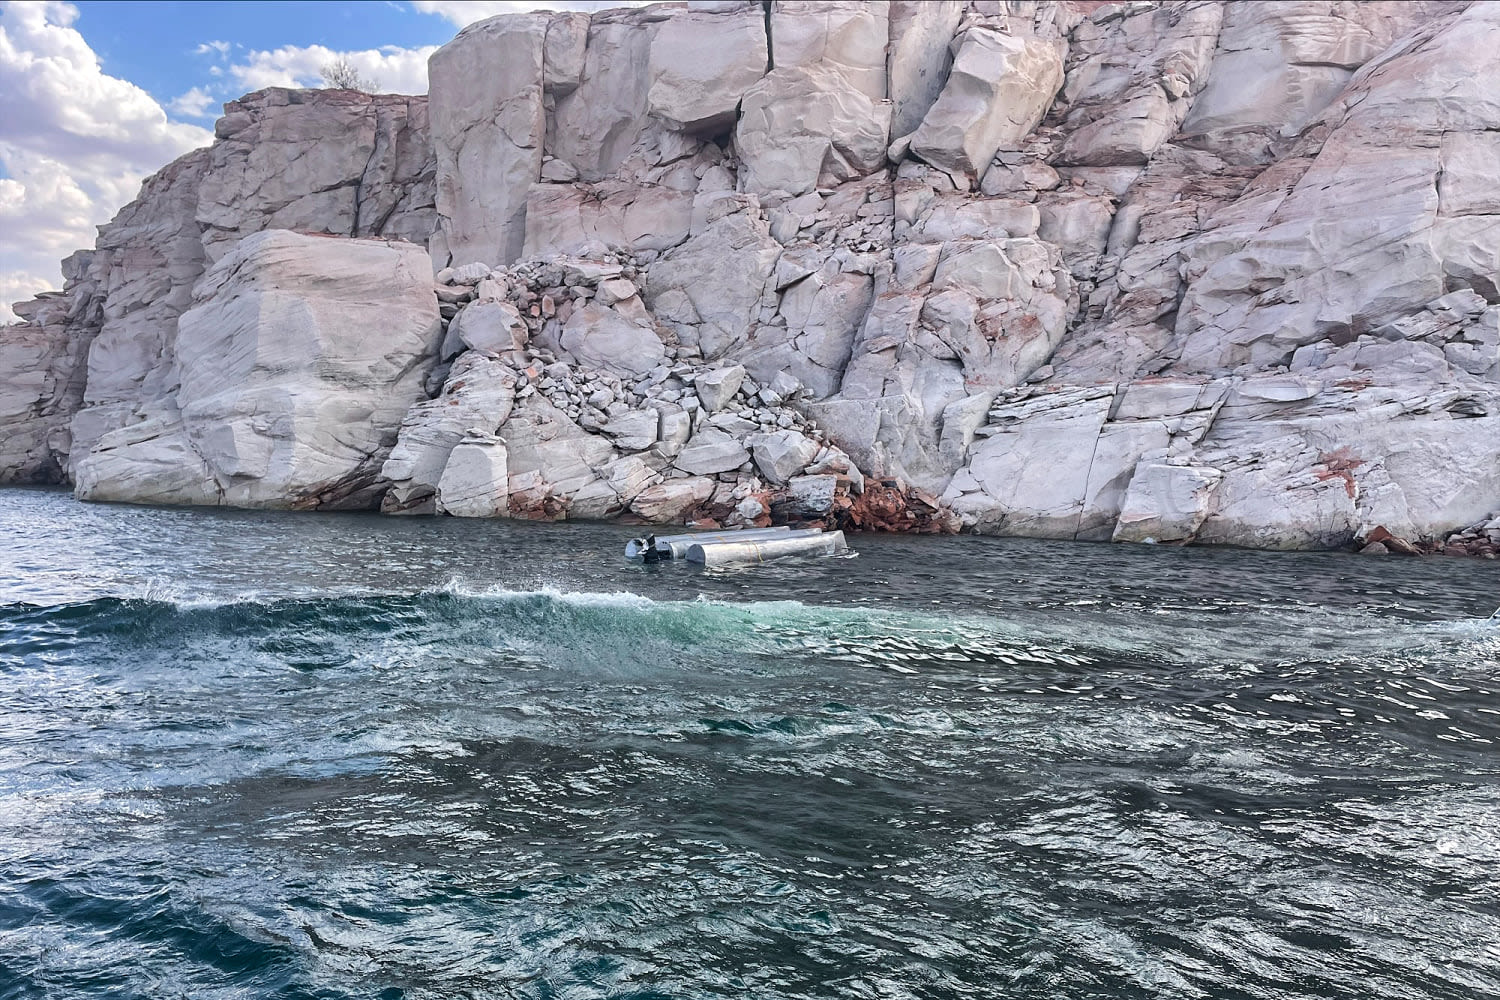 72-year-old woman and 2 children dead after pontoon boat capsizes in Arizona's Lake Powell